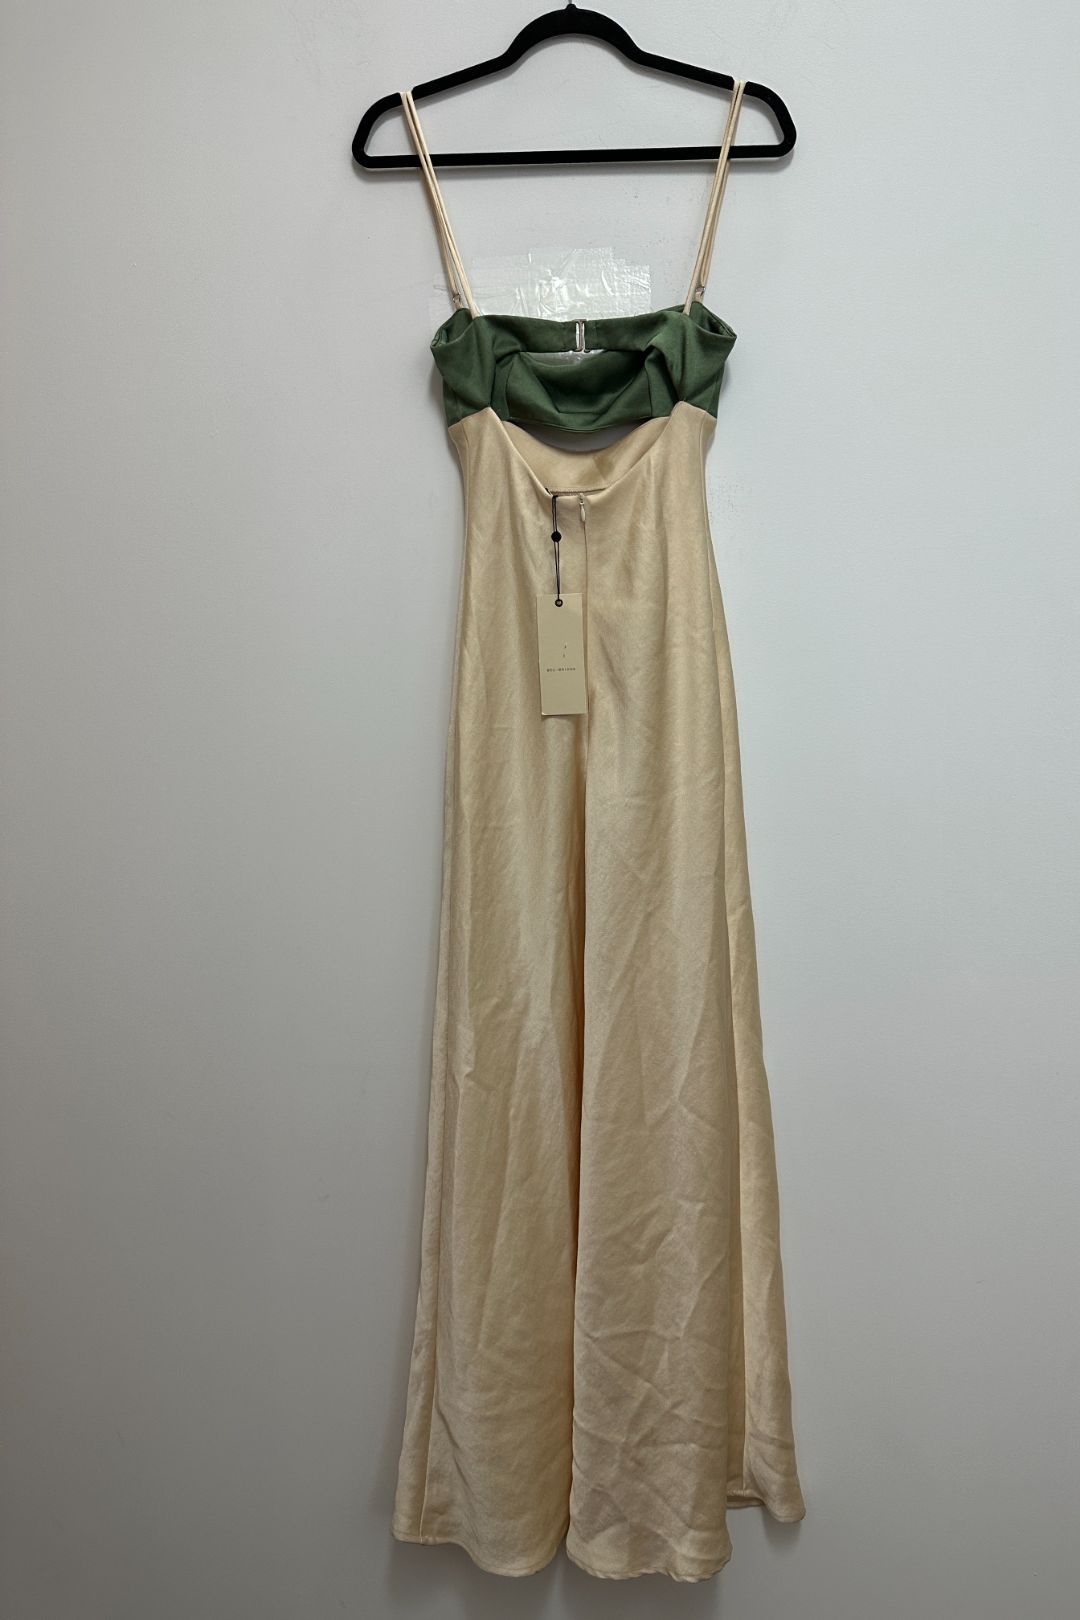 Bec and Bridge Carrie Maxi Dress in Cream and Green